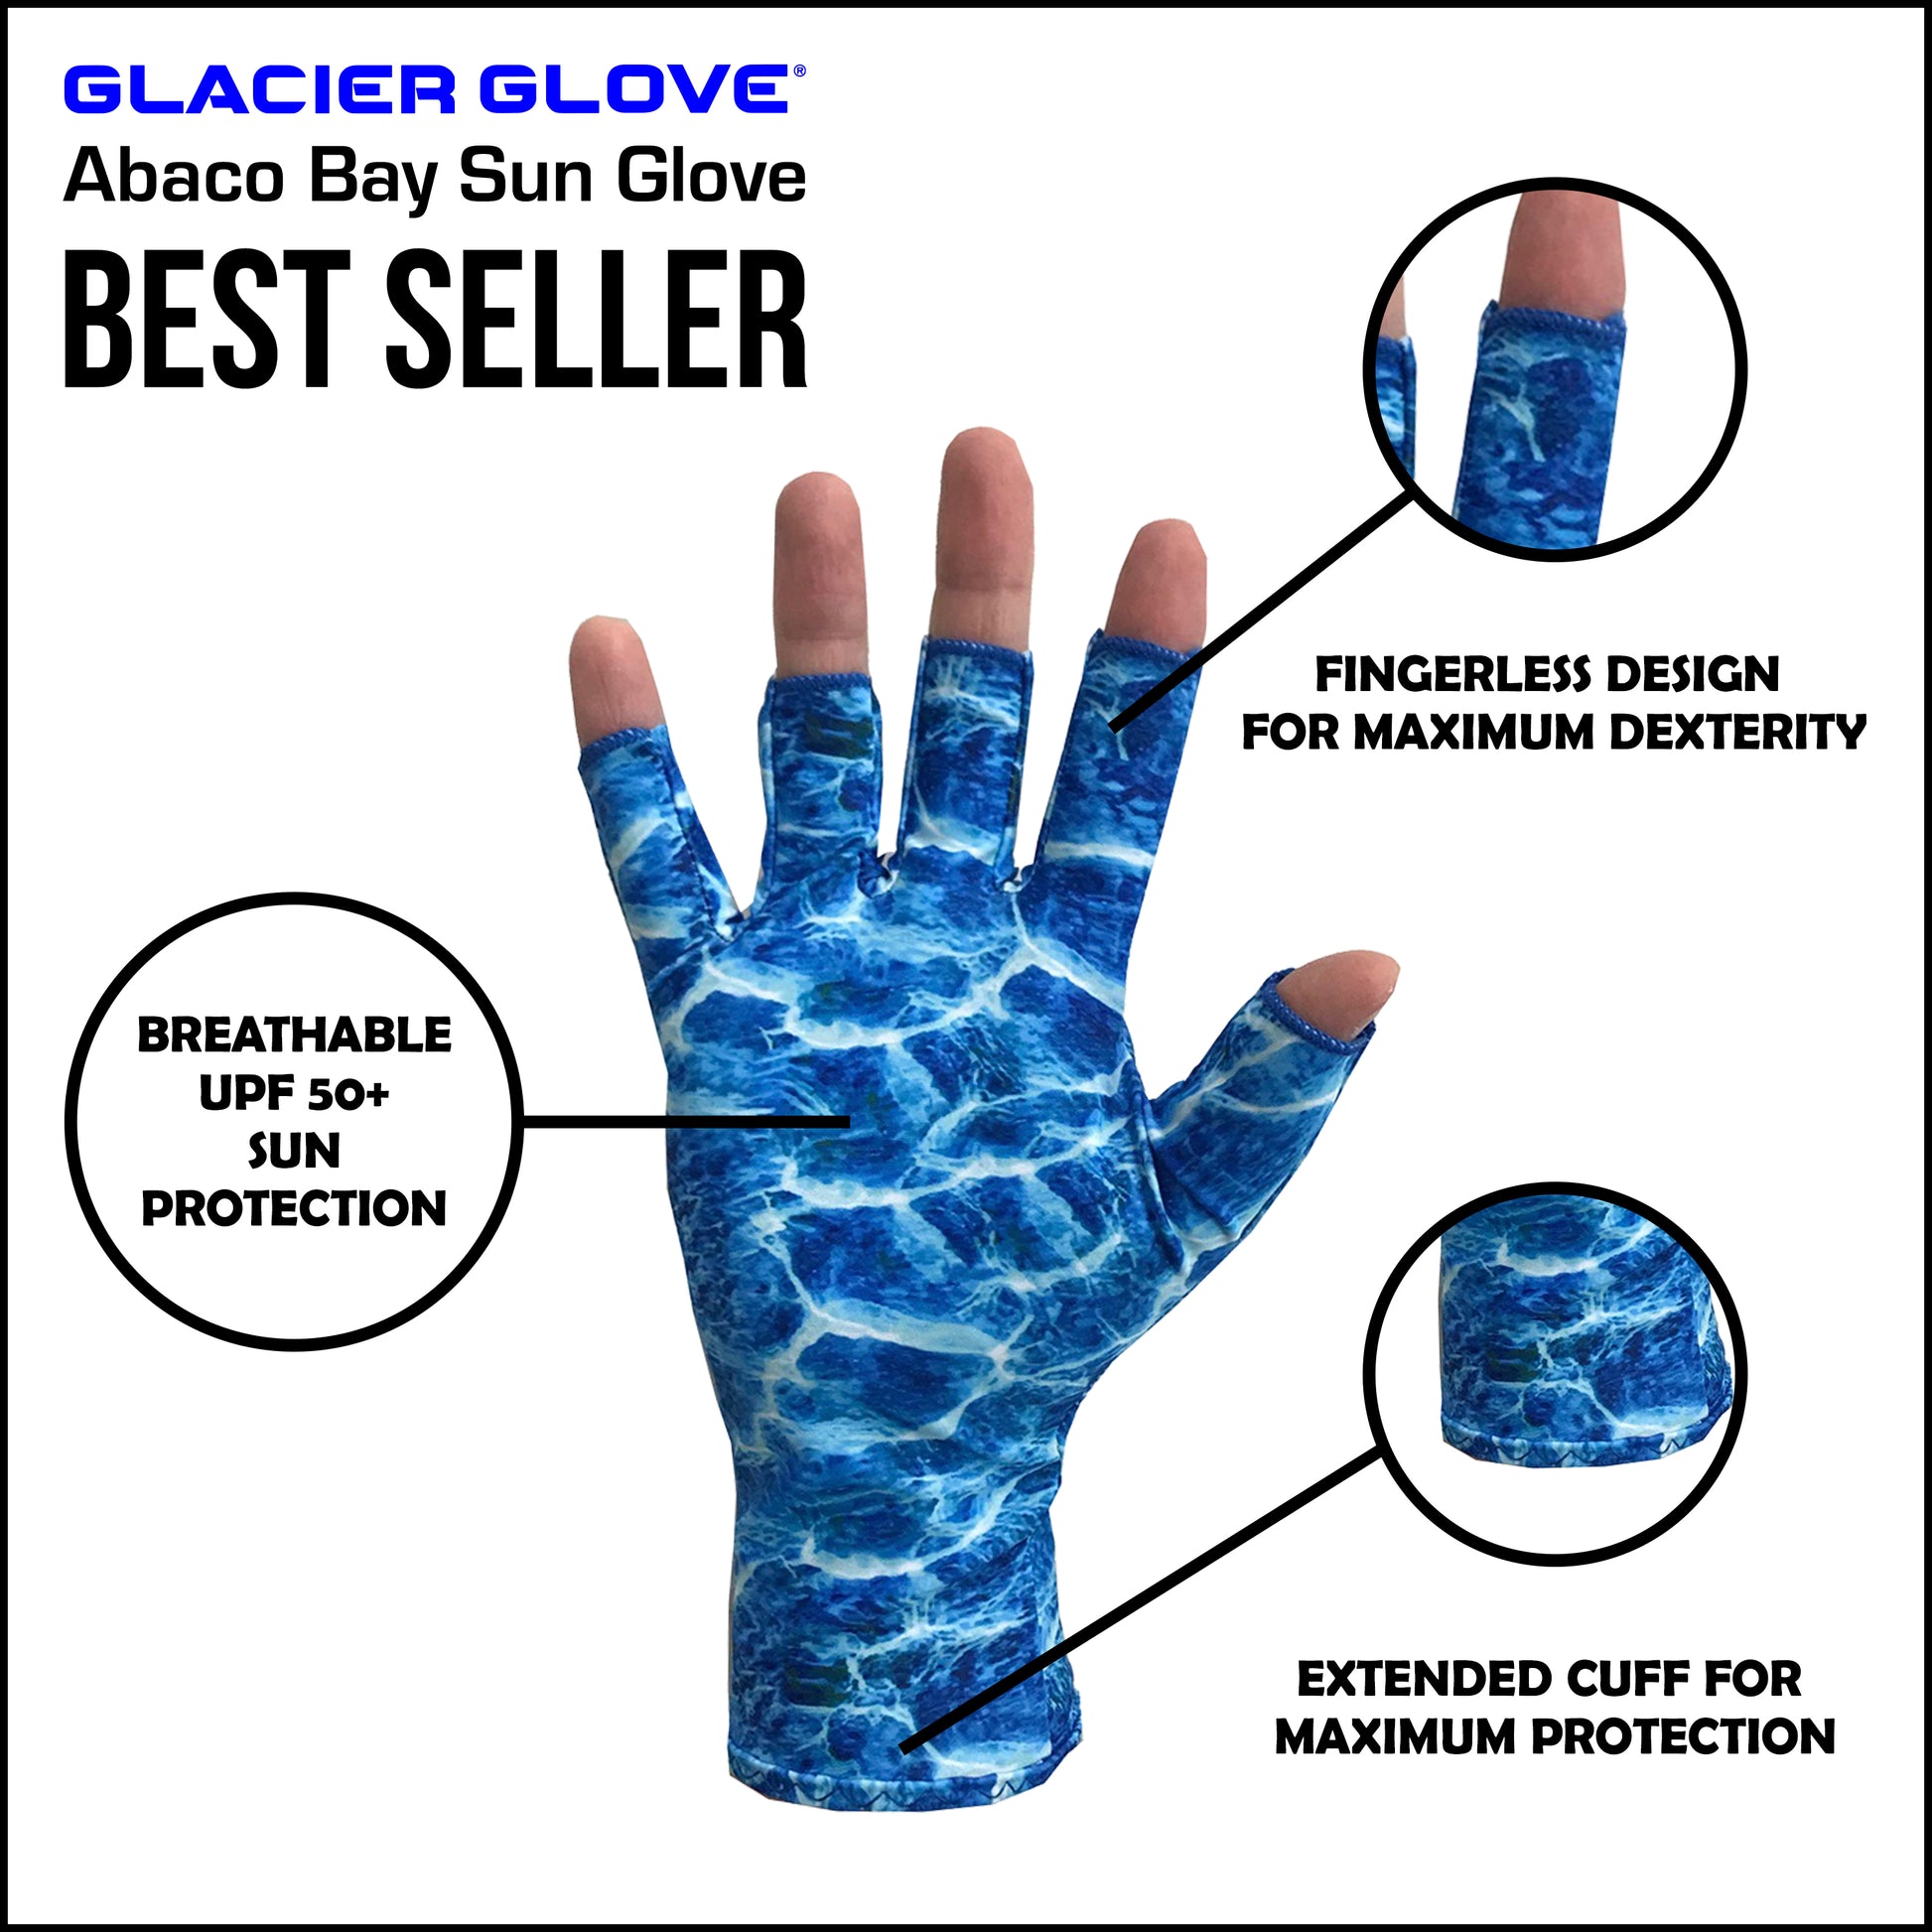 The Abaco Bay Sun Glove is the most popular model in our sun protection line. Independently tested and verified, it is rated at the maximum protection of UPF 50+. Providing both hand and wrist protection, this glove is great for any of your outdoor adventures. 3